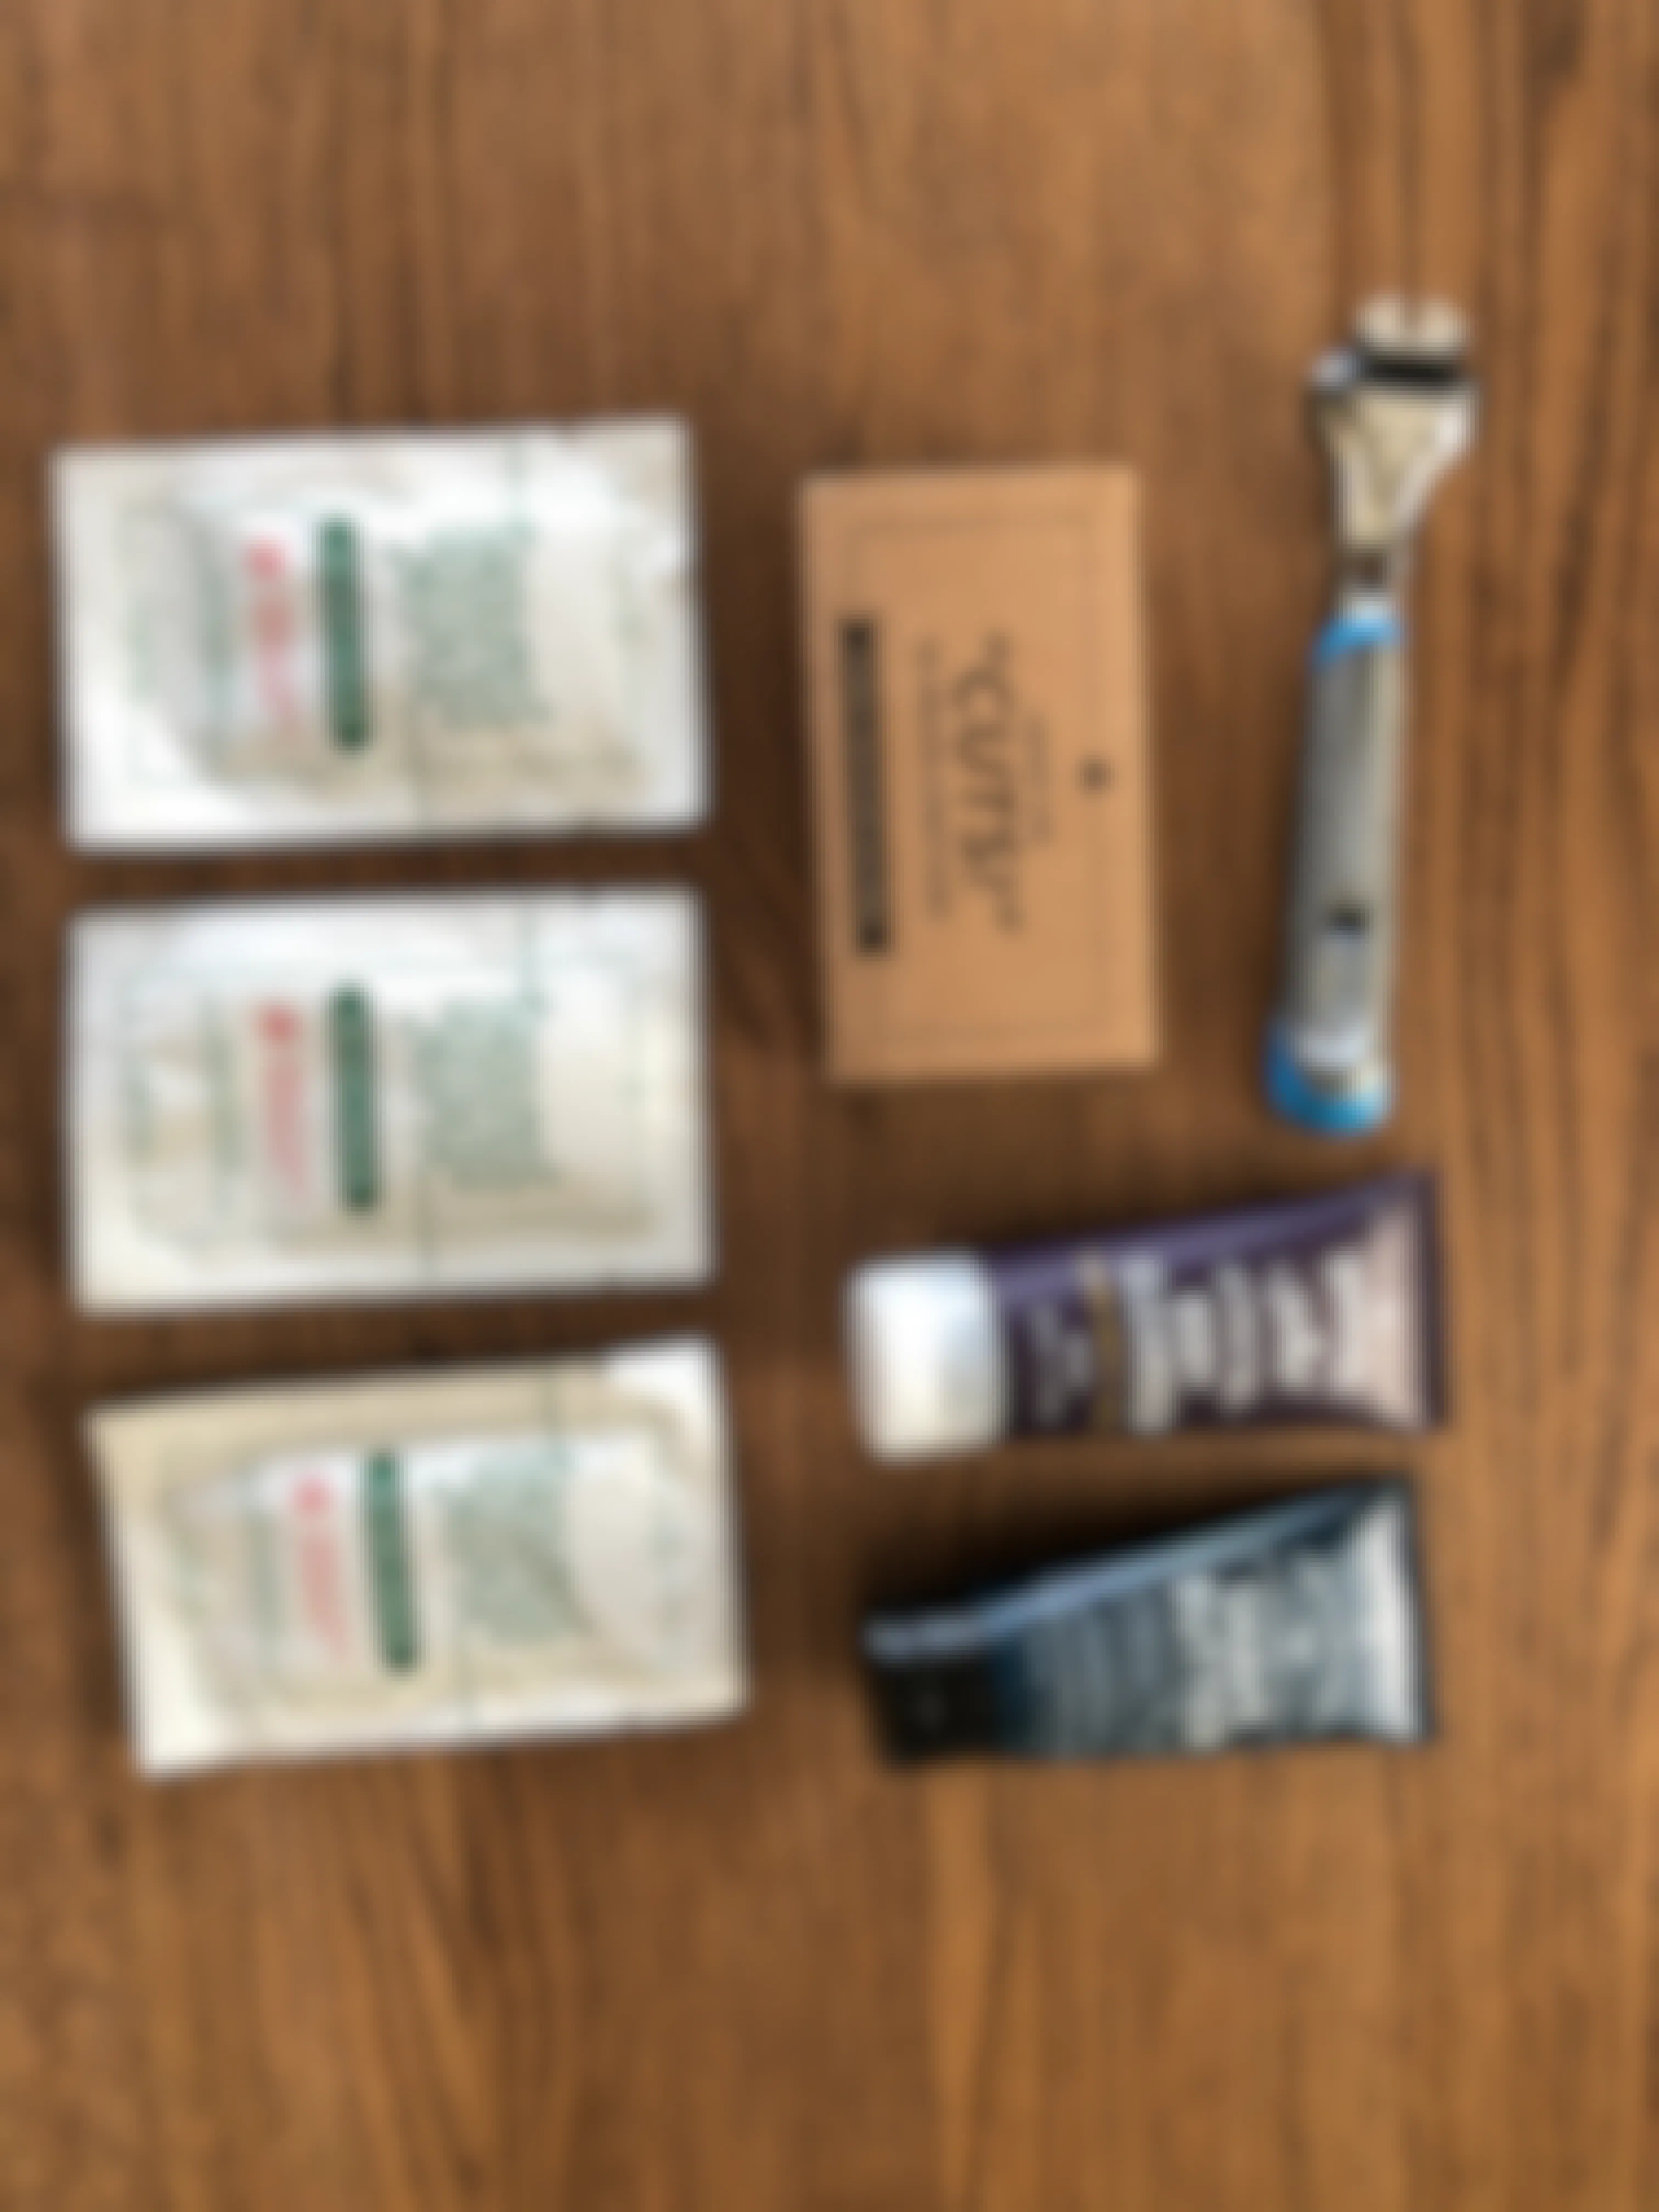 Dollar Shave Club's starter set box contents laid out on a table, including handle, wipes, shaving foam and face cleanser